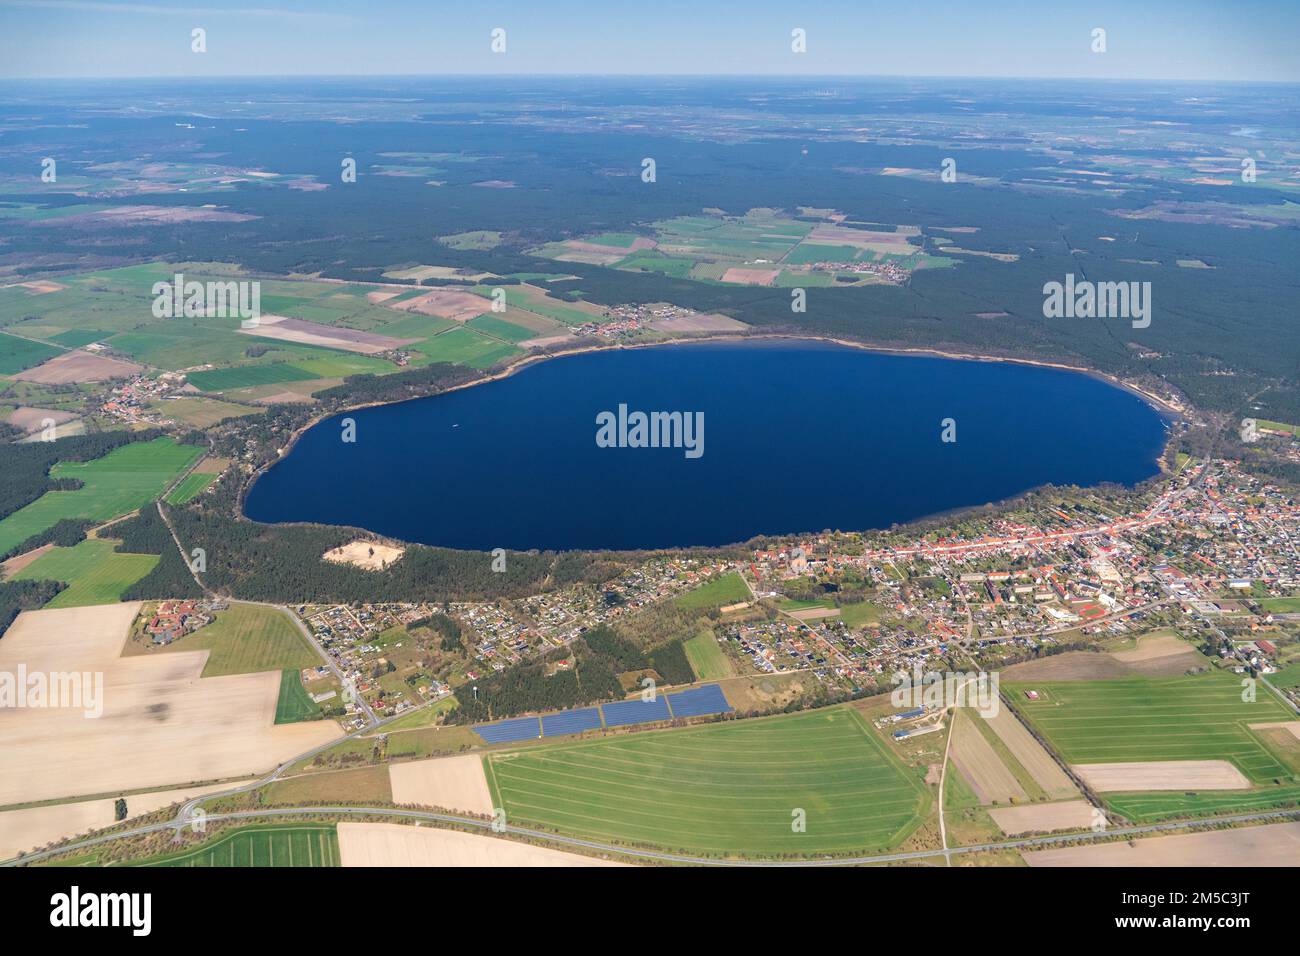 Aerial view of Arendsee, Altmark, water, lake, Saxony-Anhalt, Germany Stock Photo